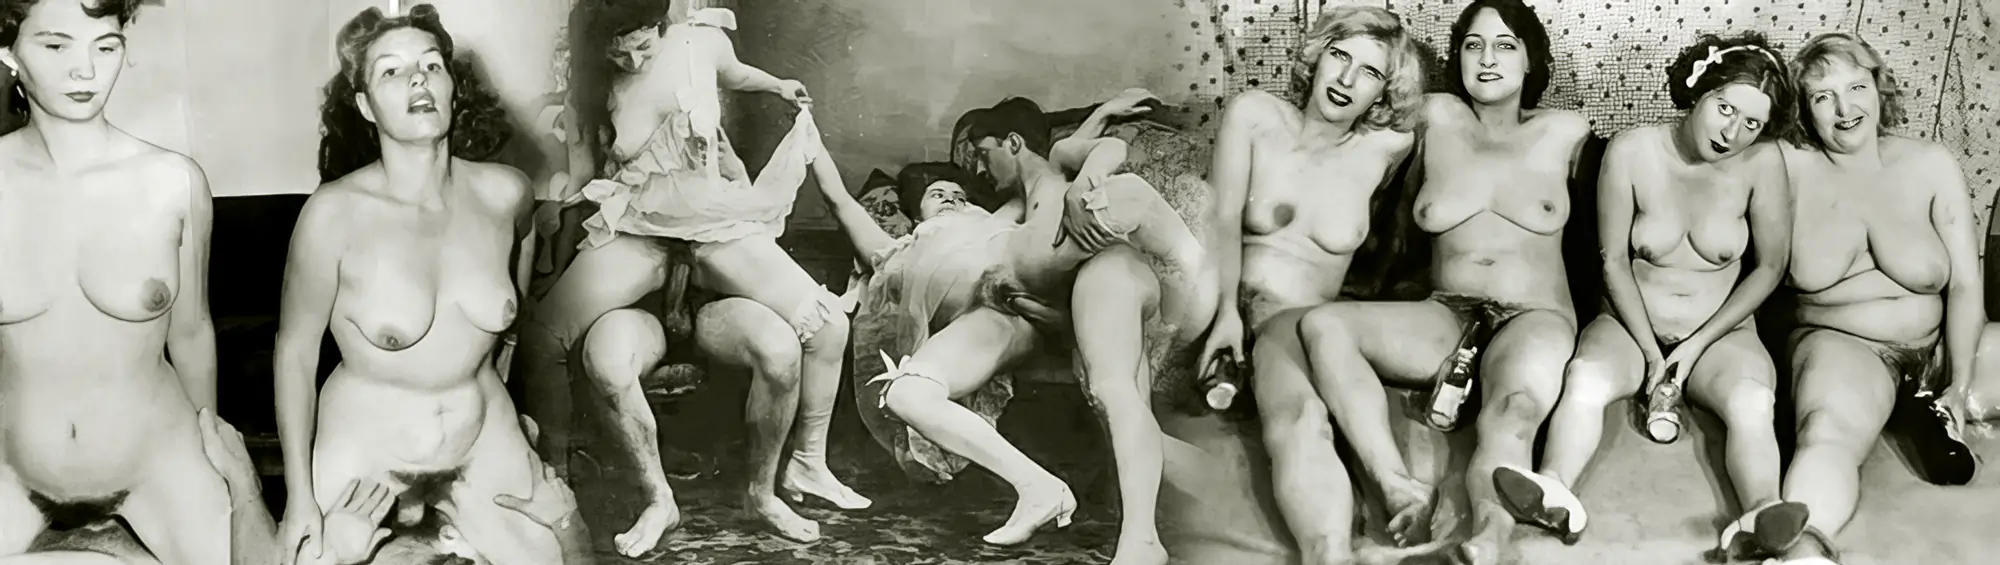 Vintage Porn with Naked Mature Women in Hardcore Sex Action